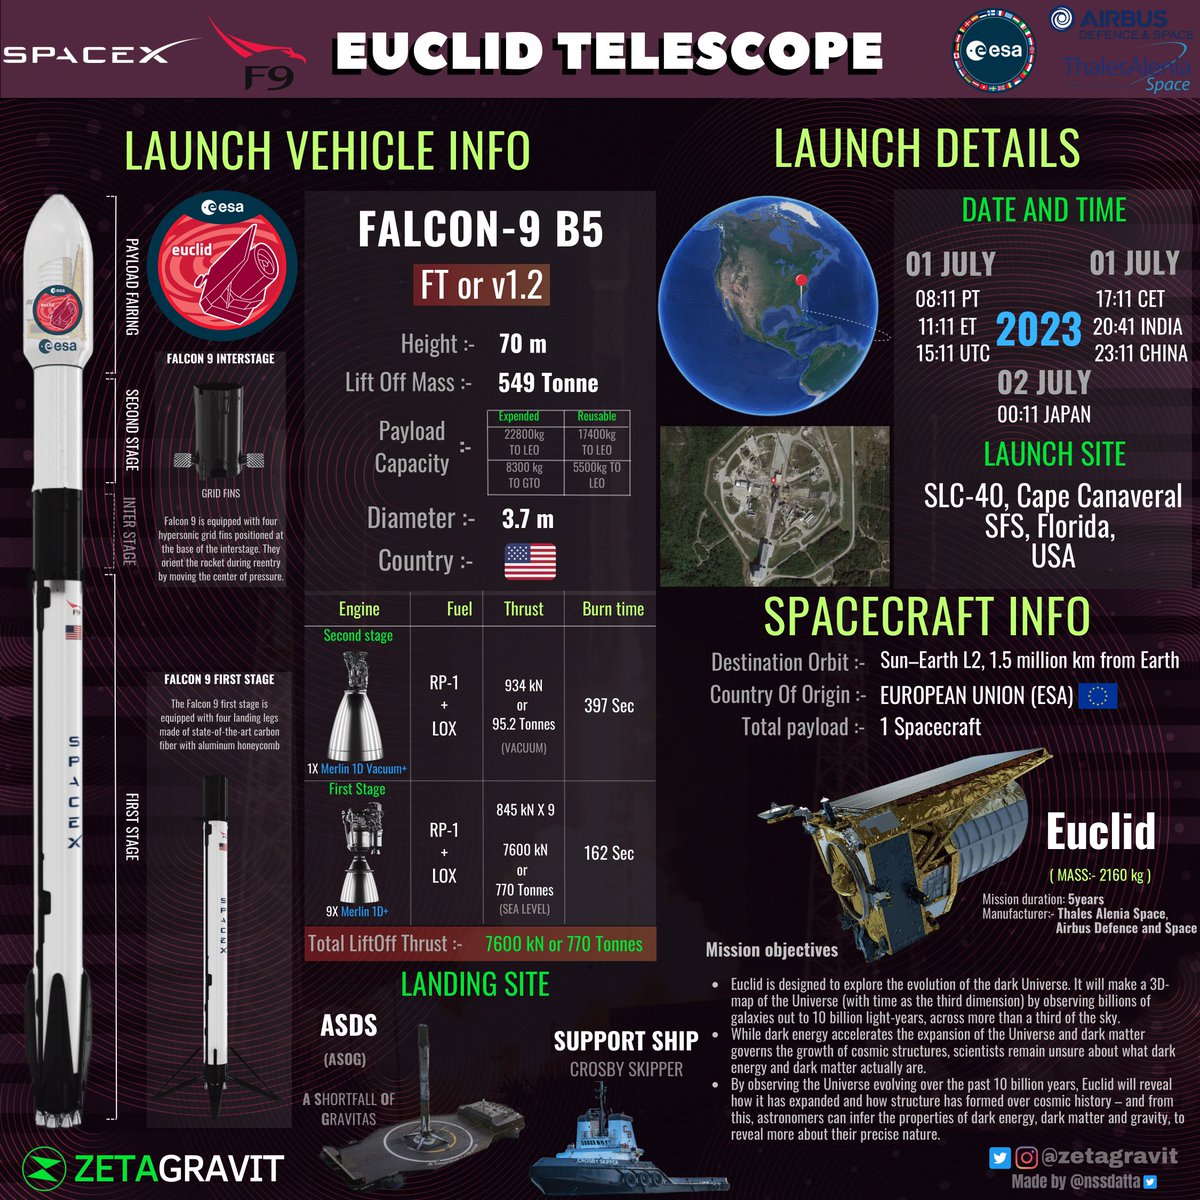 The Launch Update from @SpaceX & @esa 📢

#SpaceX's #Falcon9  will be Launching @ESA_Euclid into  Sun–Earth L2, 1.5 million km from Earth

The Launch is on July 01 20:41 IST / 15:11 UTC from SLC-40, #CapeCanaveral SFS, #Florida

Follow @zetagravit

#DarkMatter #DarkEnergy #ESA